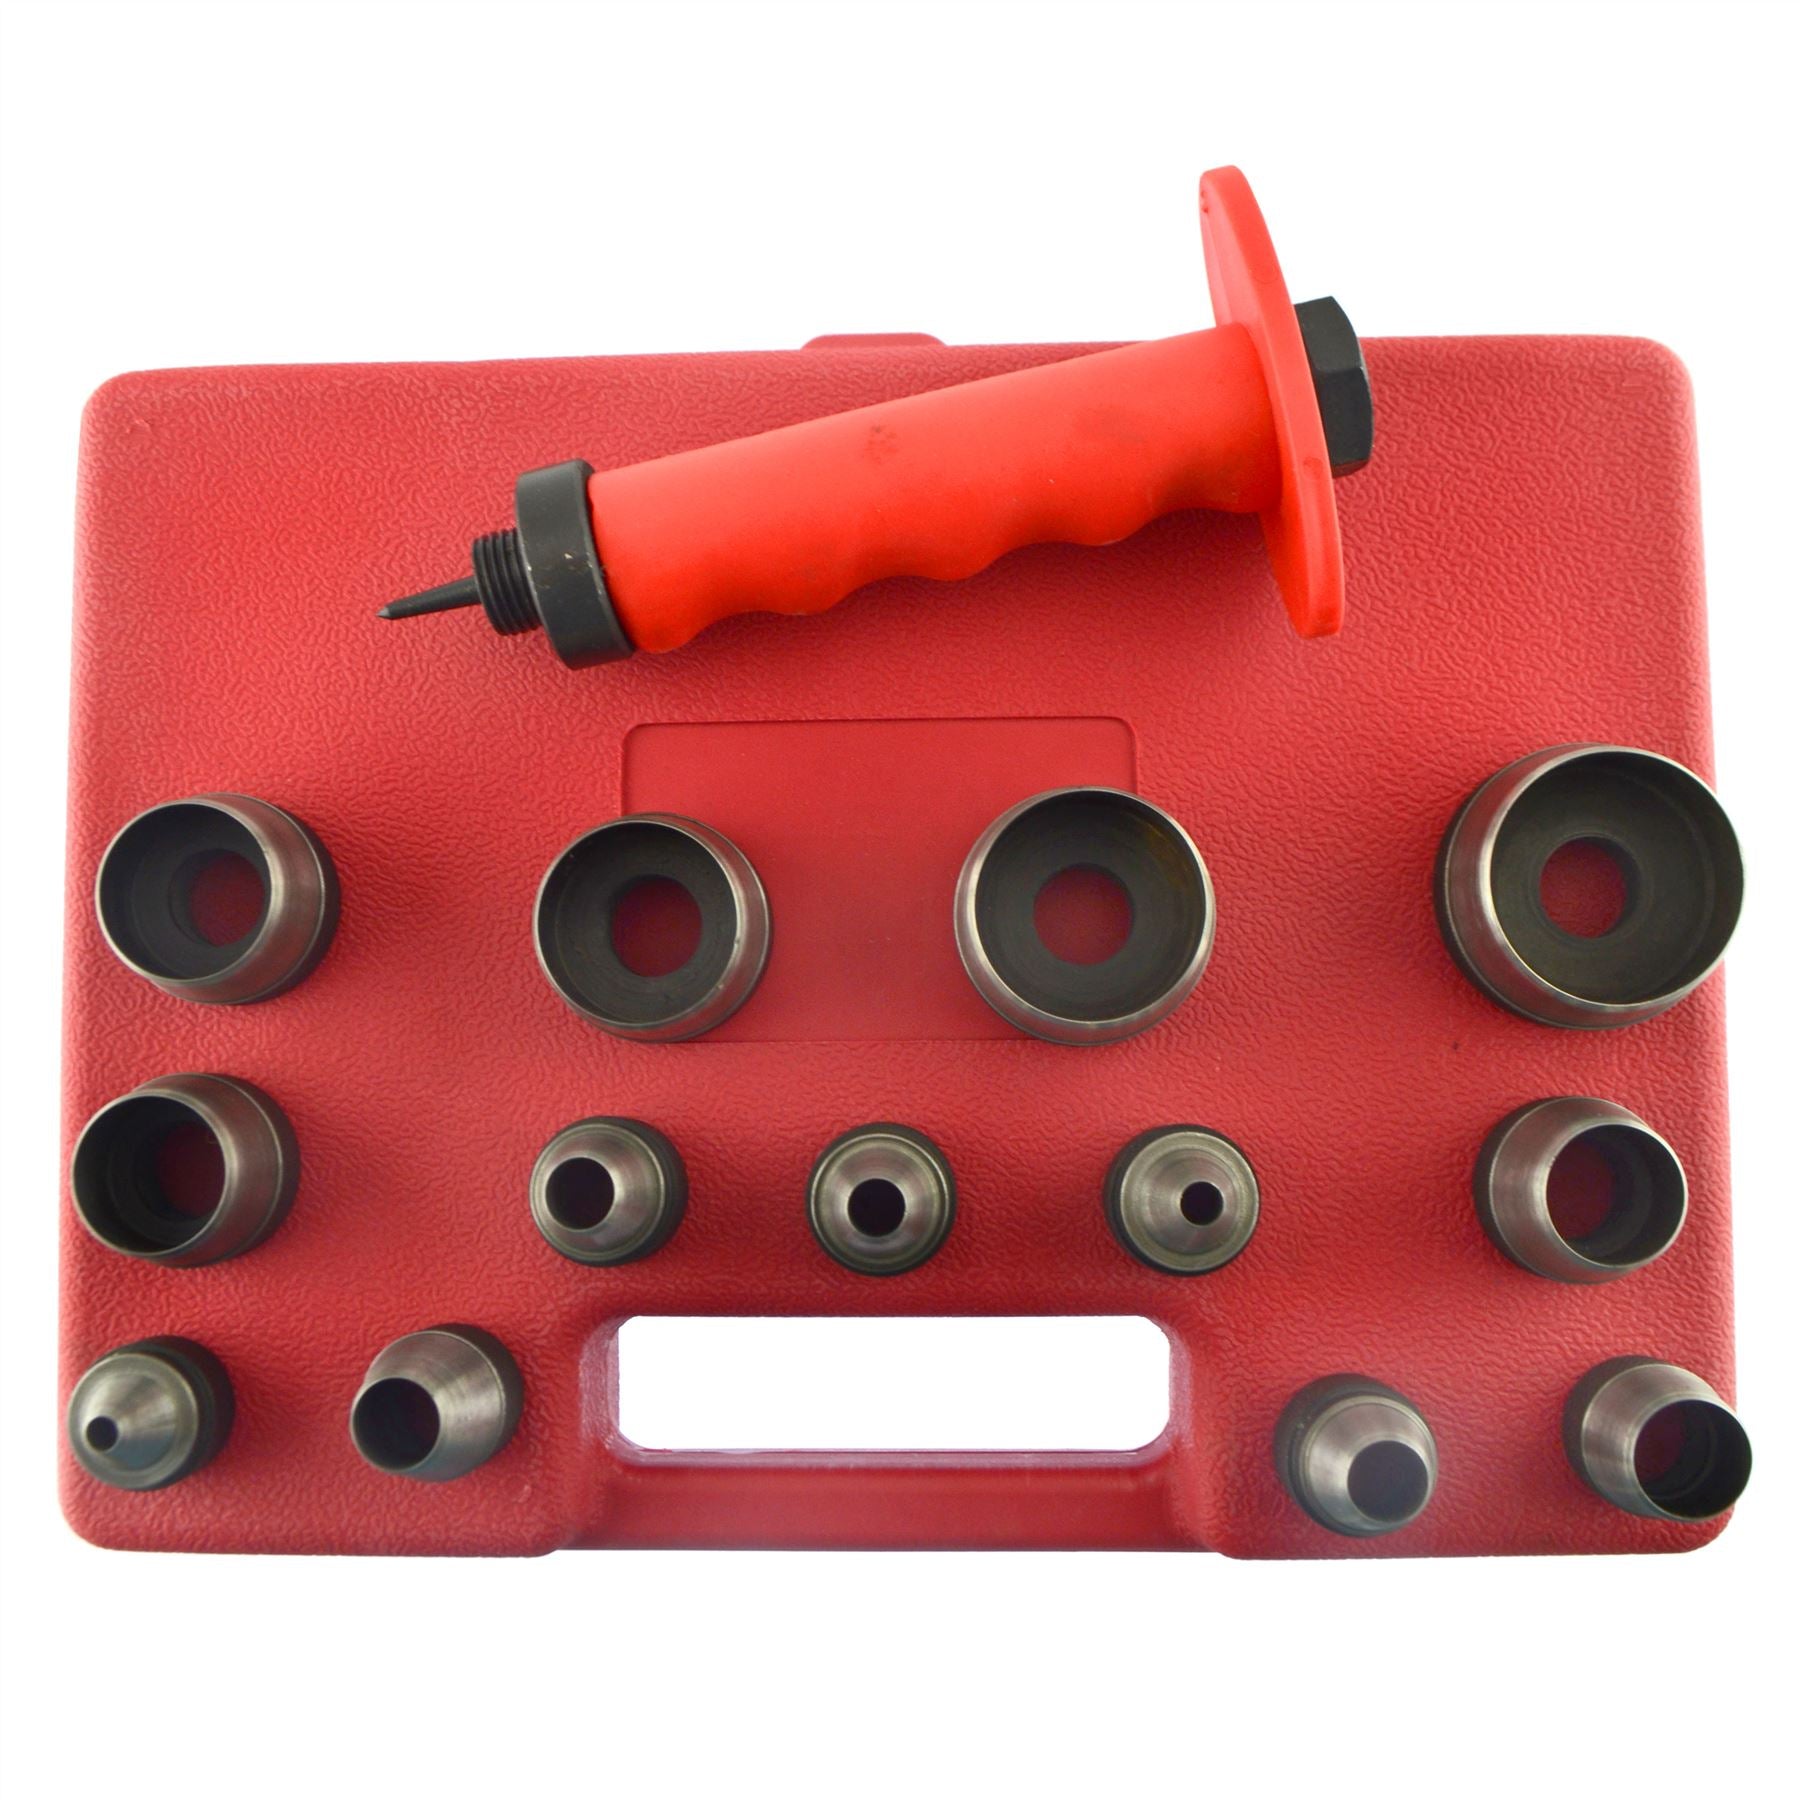 Hollow Punch Set Hole Punch Tool For Leather Plastic Foam Fibre 5